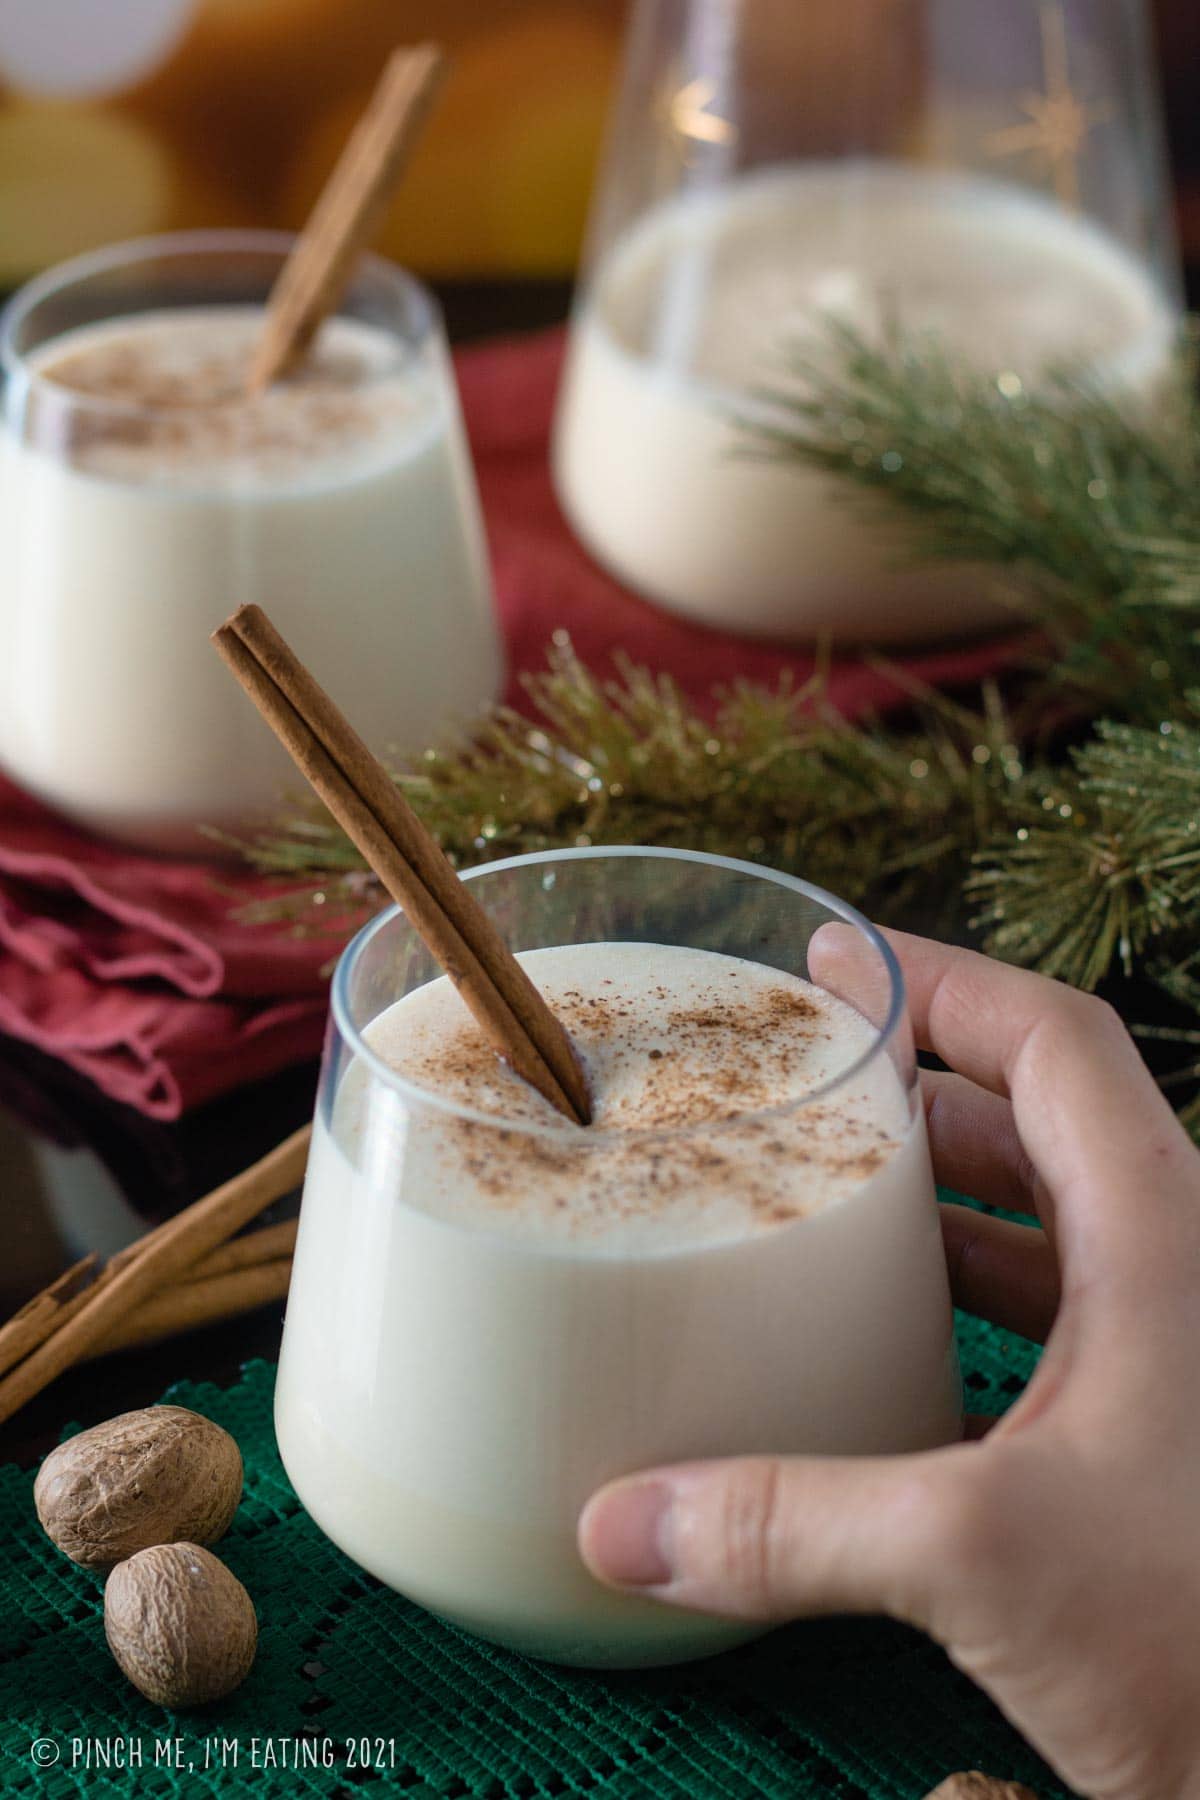 Hand holding glass of eggnog with cinnamon stick, topped with ground nutmeg.